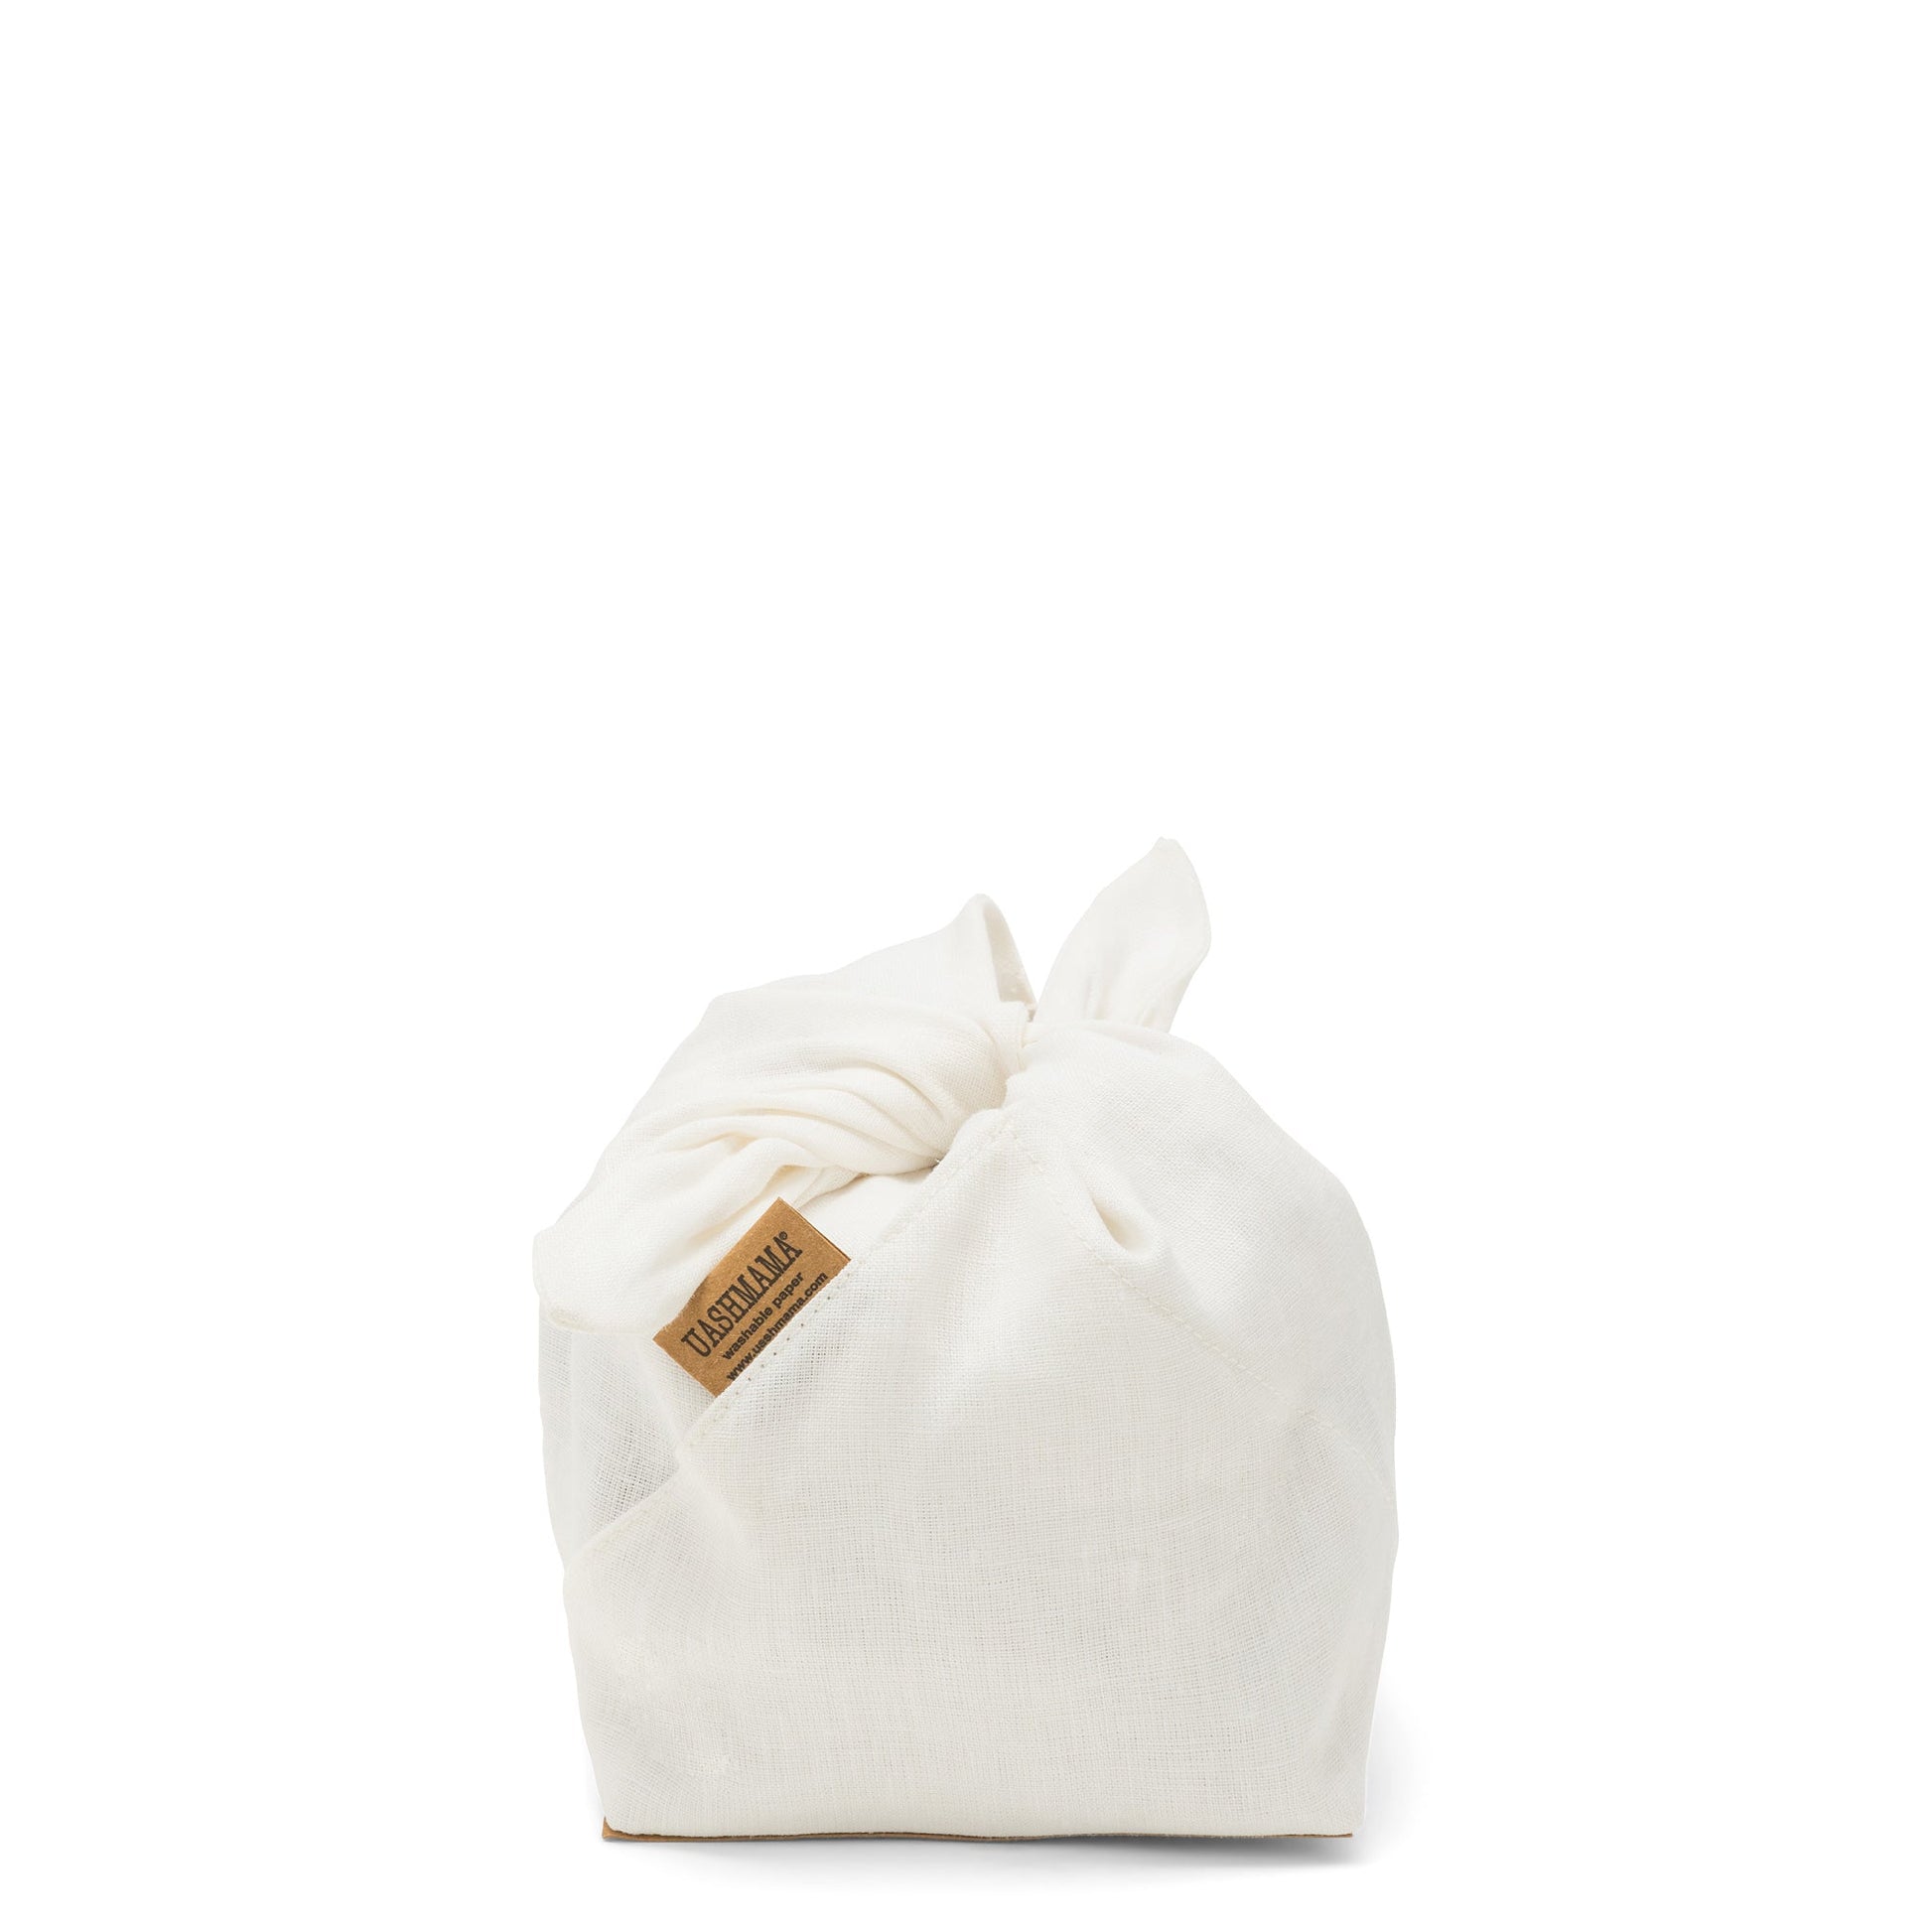 A white linen bread bag is shown with tied handles, and a tan UASHMAMA logo label at the front right side.